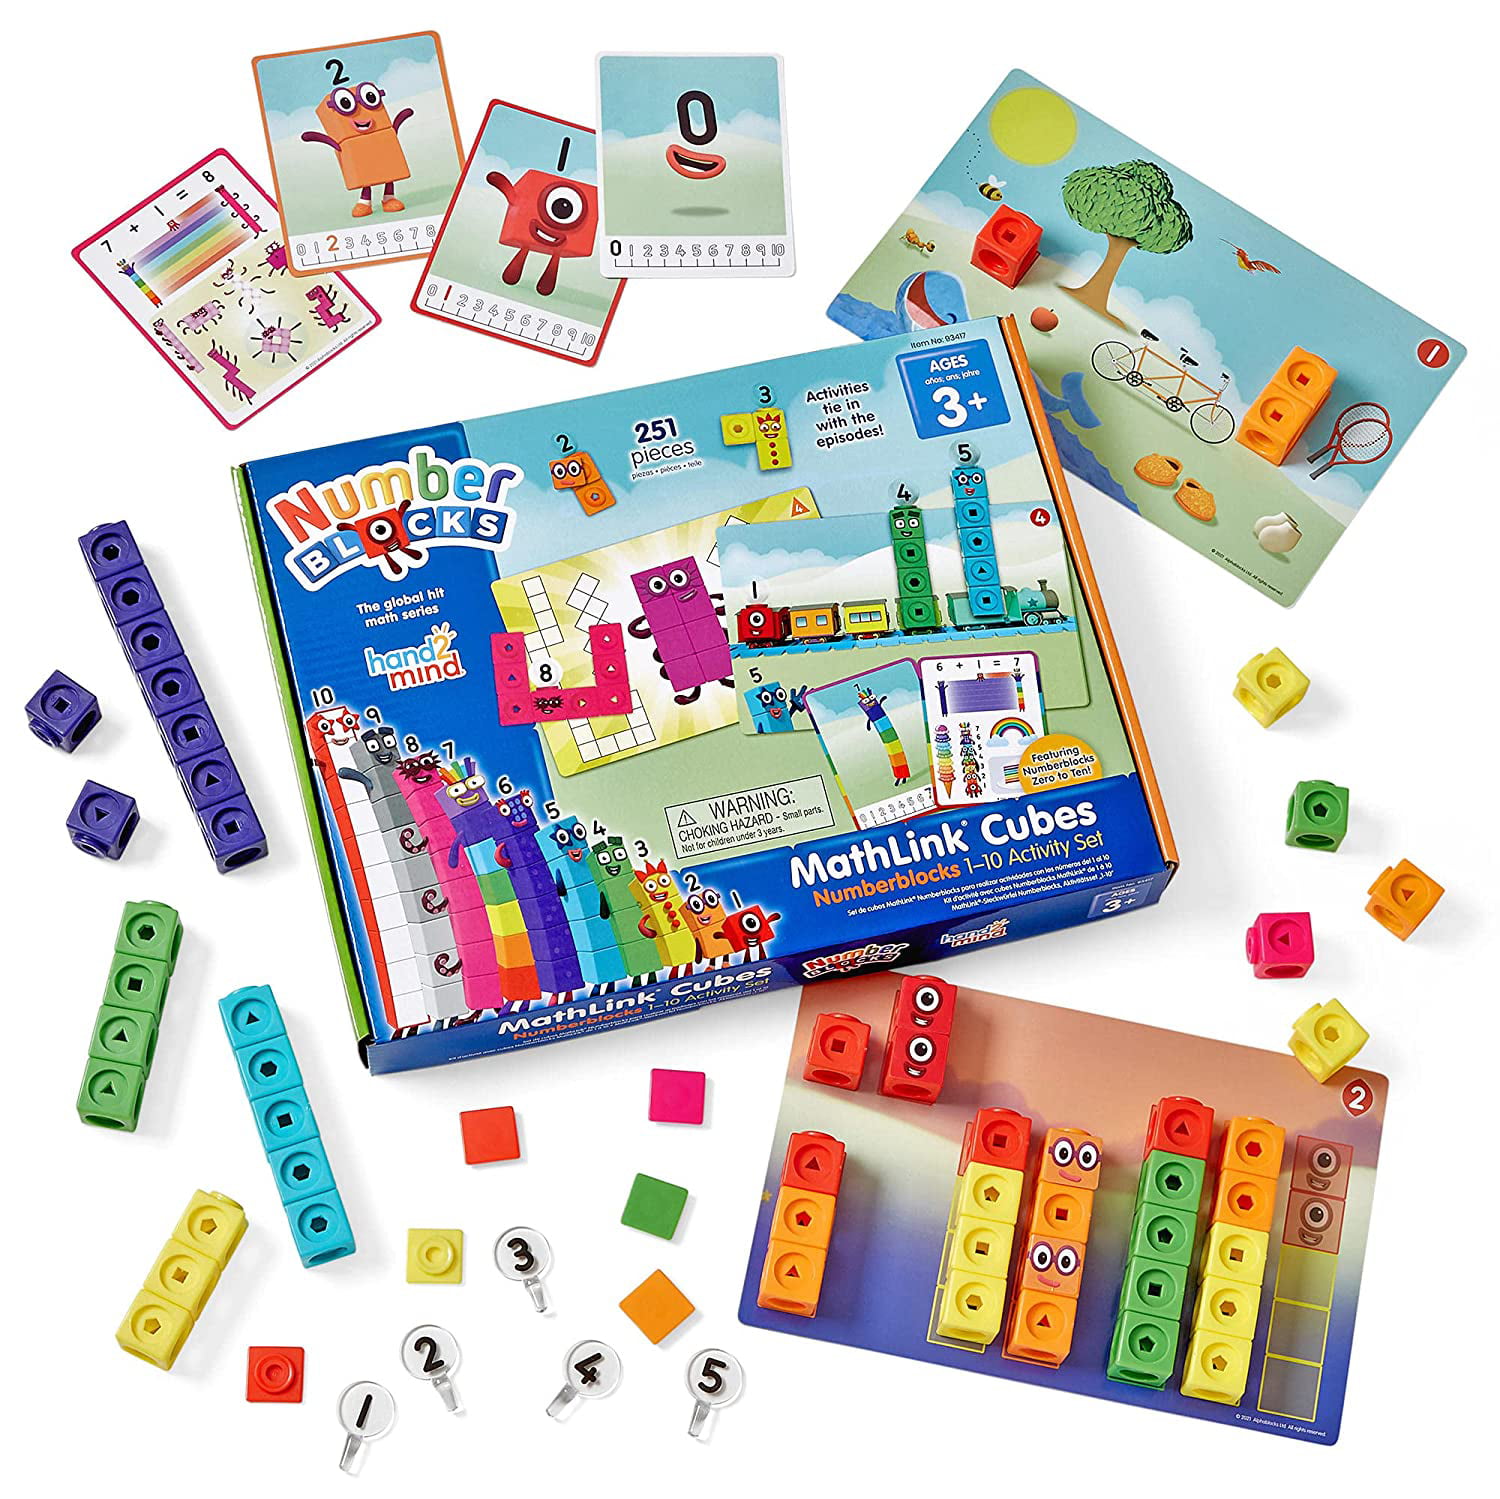 Details about   Numberblocks  Mathlink Cubes 1-10 Activity Set Early Years  Learning education 